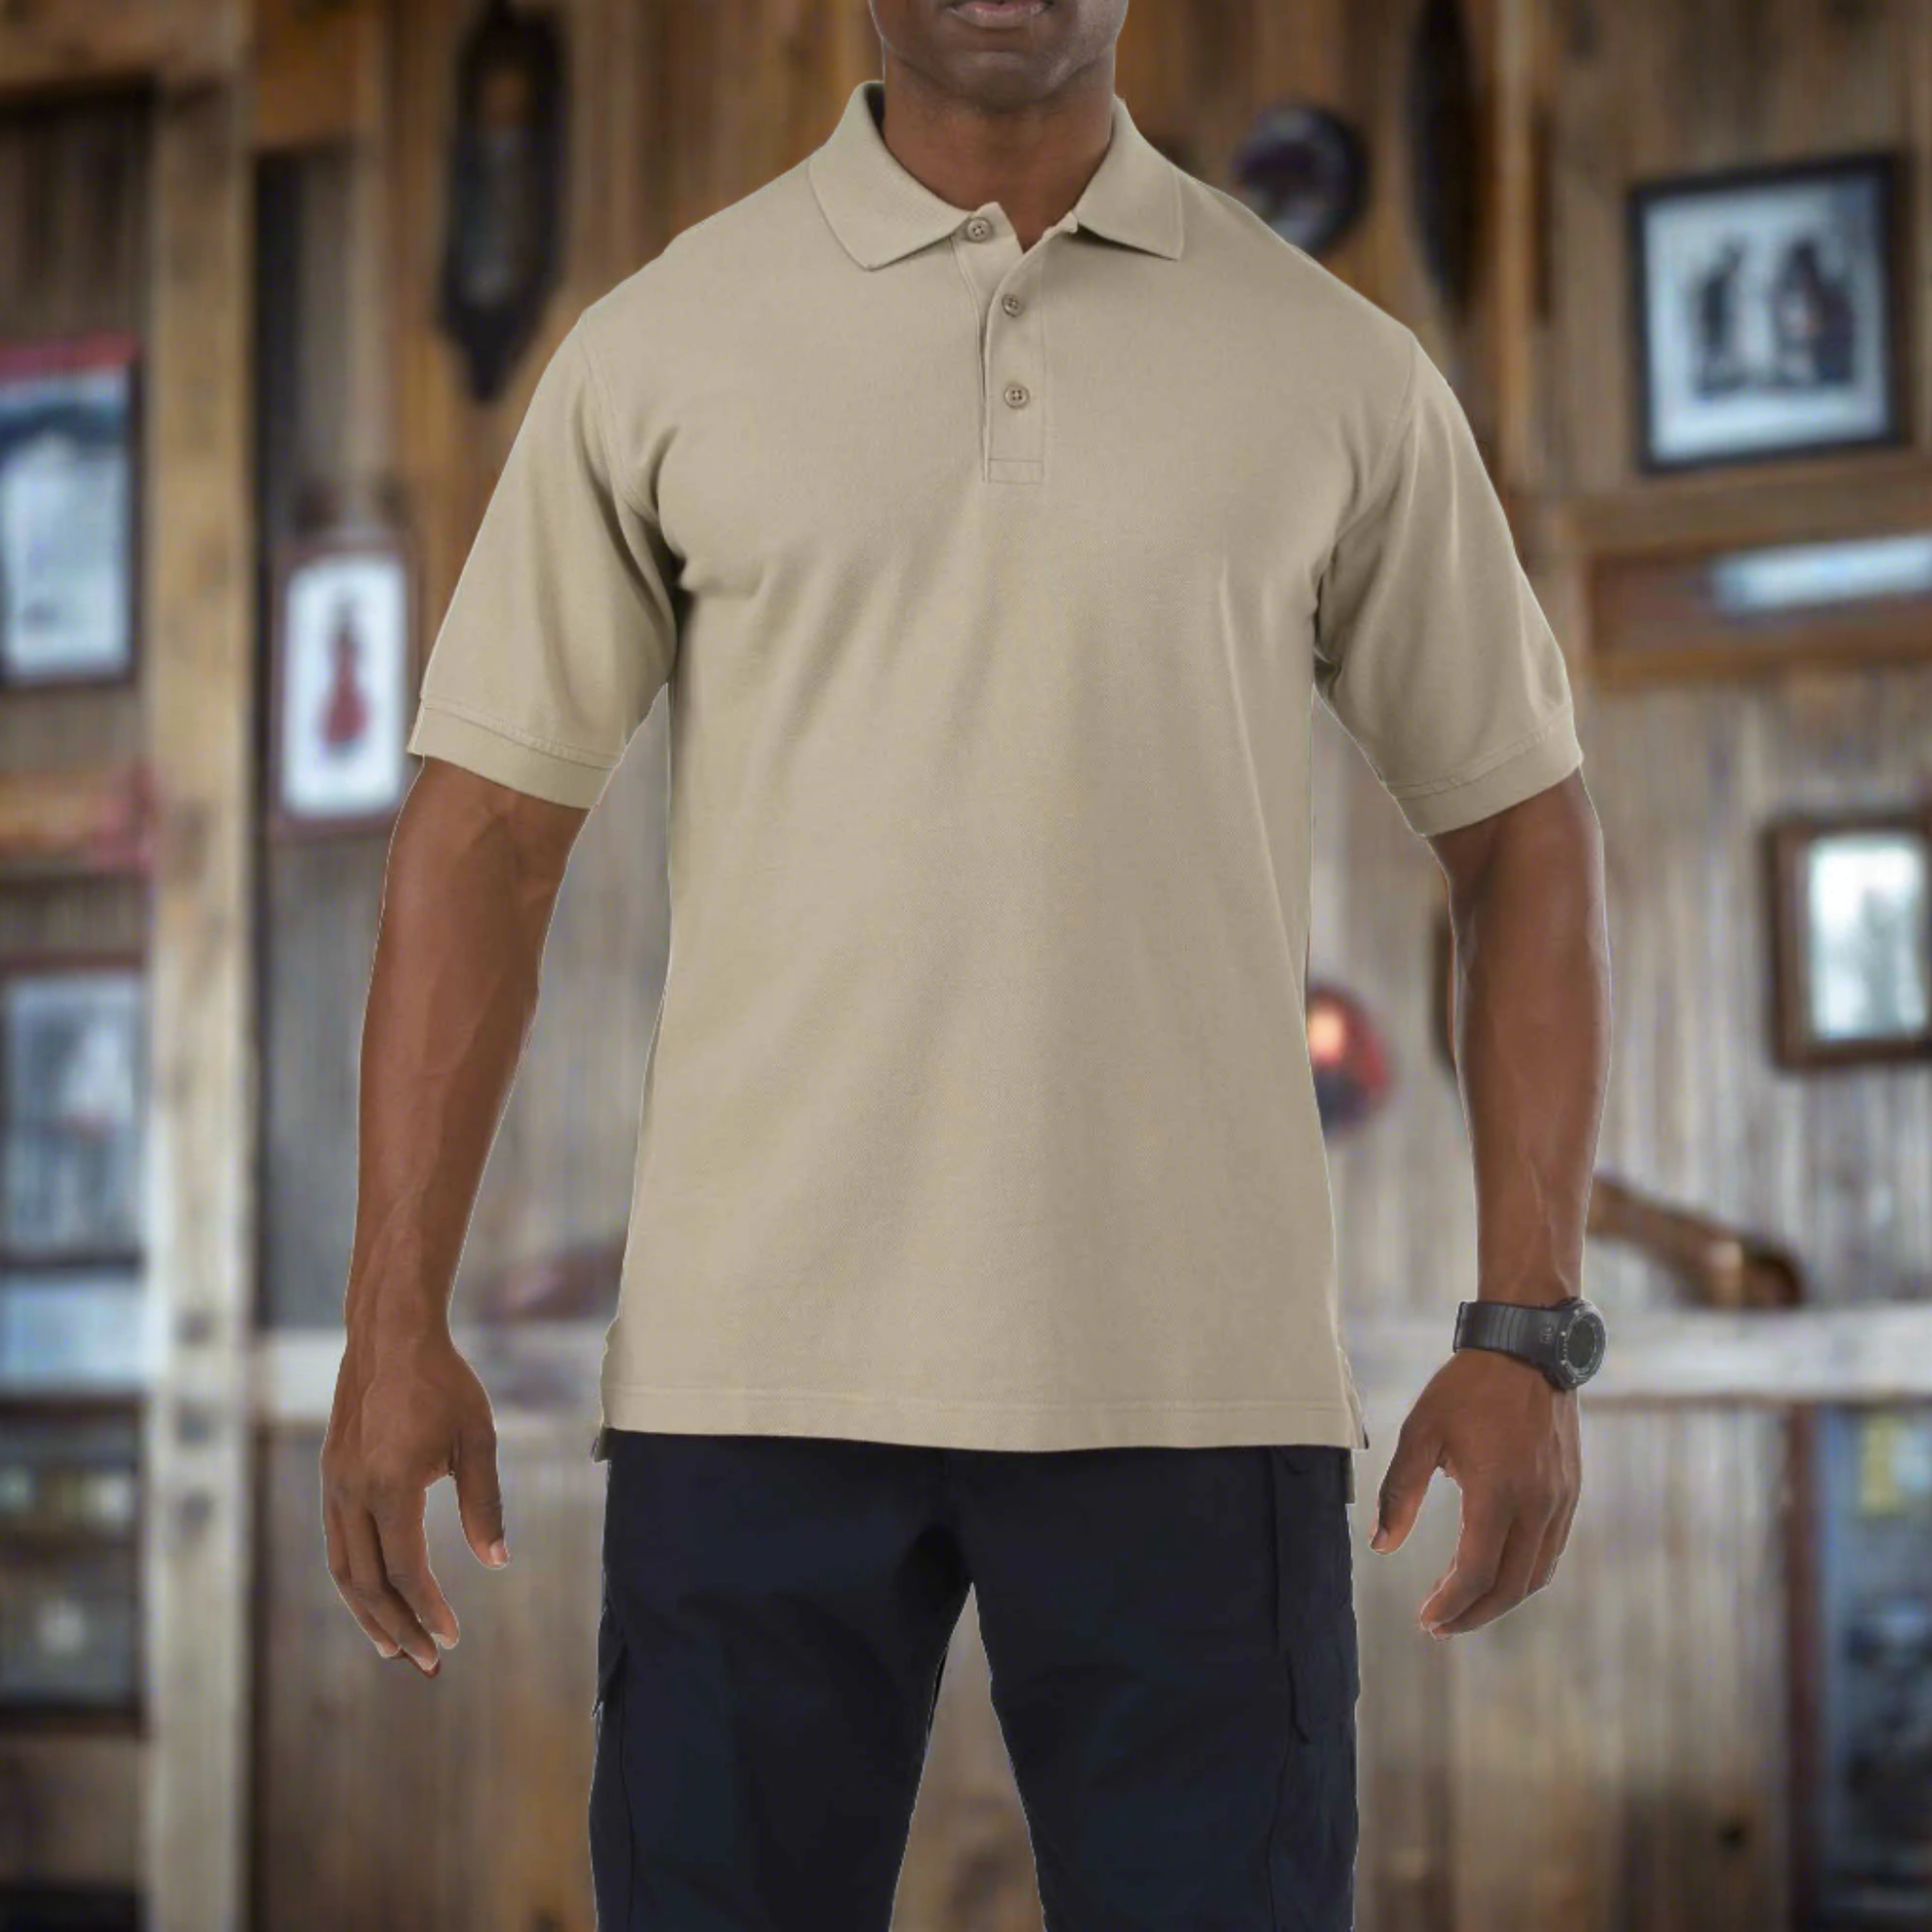 Tops - 5.11 Tactical Professional Short Sleeve Polo